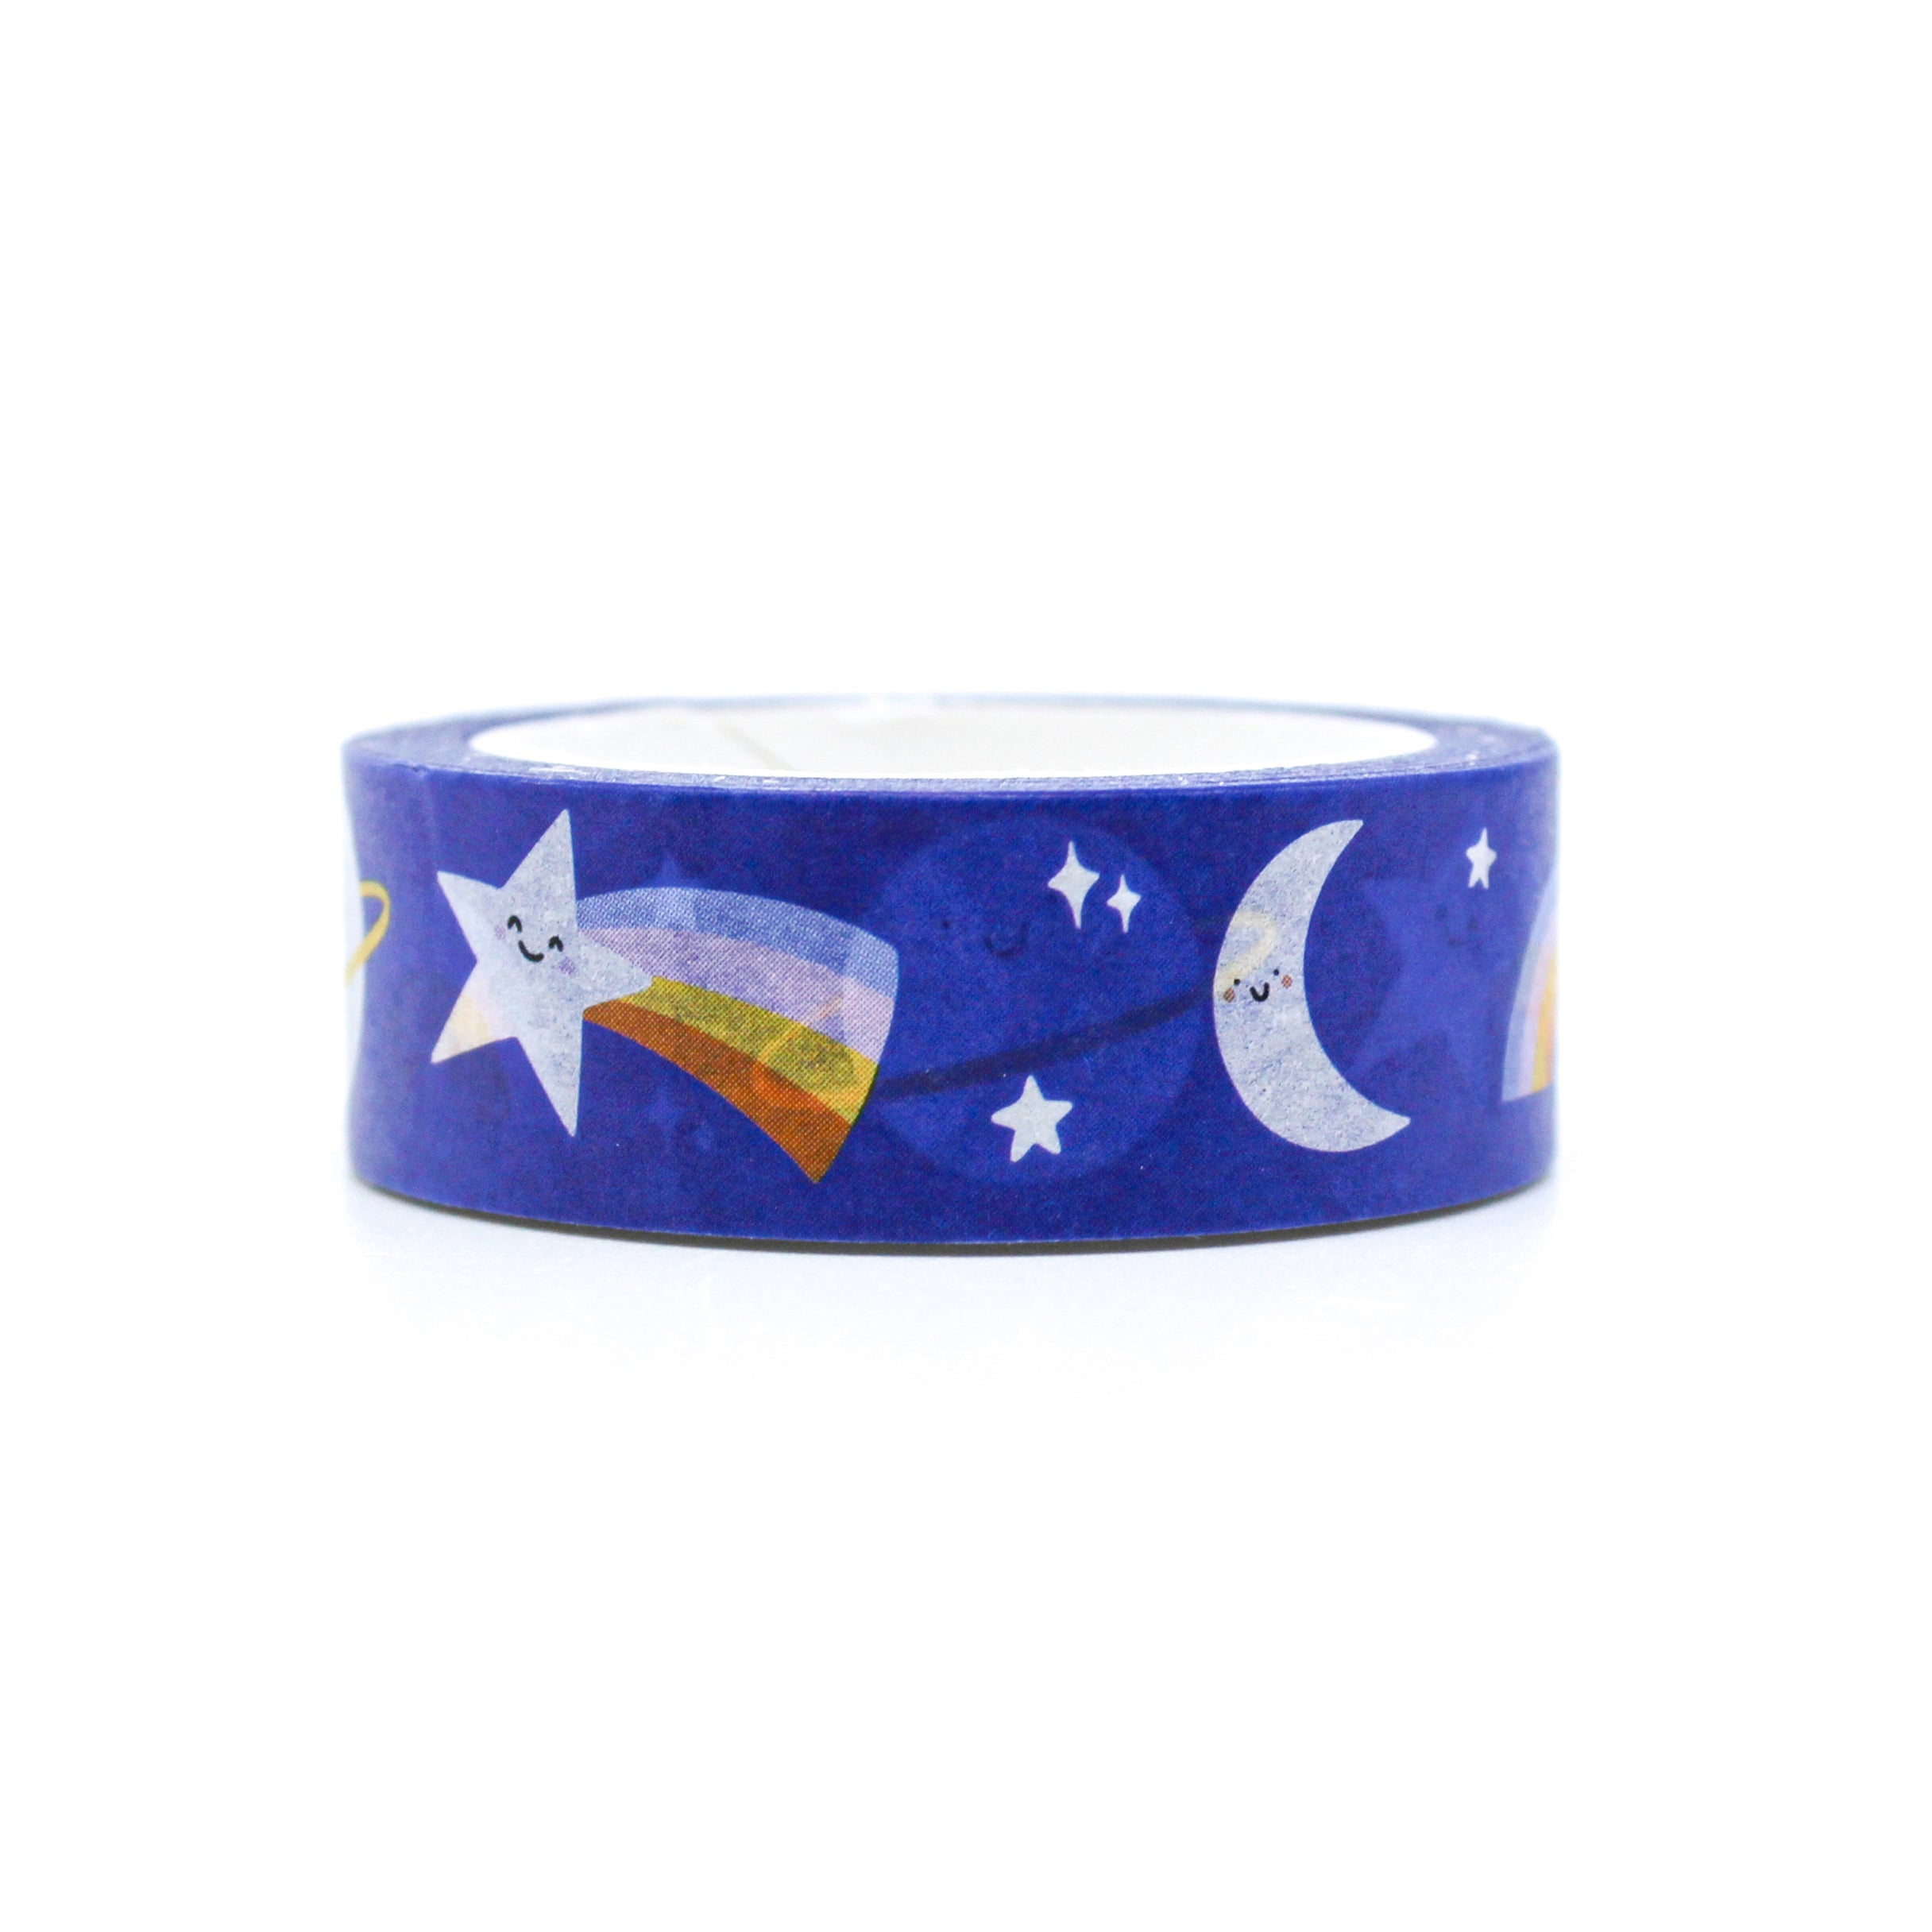 This is cute blue cosmos, planet and rainbows washi tape from BBB Supplies Craft Shop